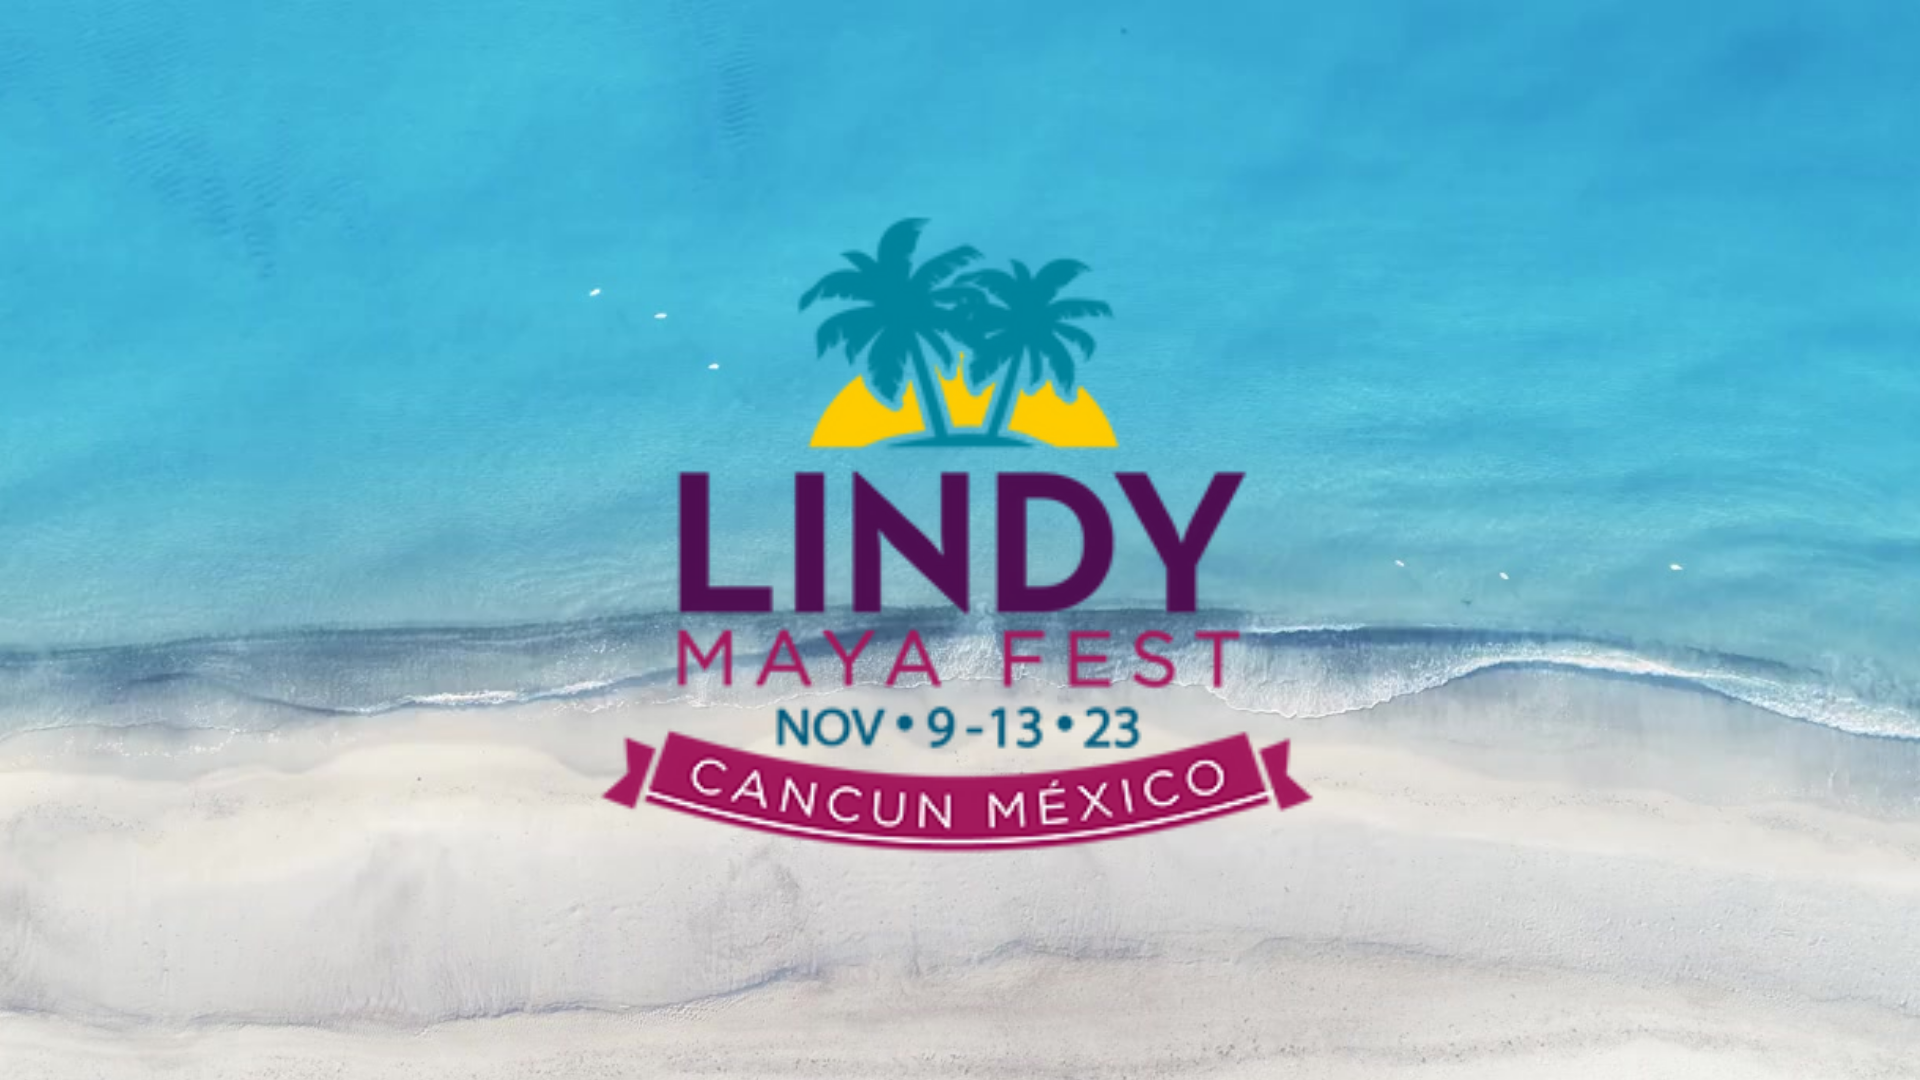 You are invited to the ultimate Swing Dance beach vacation, in Cancun, Mexico! Join swing dance enthusiasts from around the world for four days of pristine beach, a luxury 5-star all-inclusive resort, Master Classes with Chester Whitmore, DJs from around the world, Live Music and great parties!